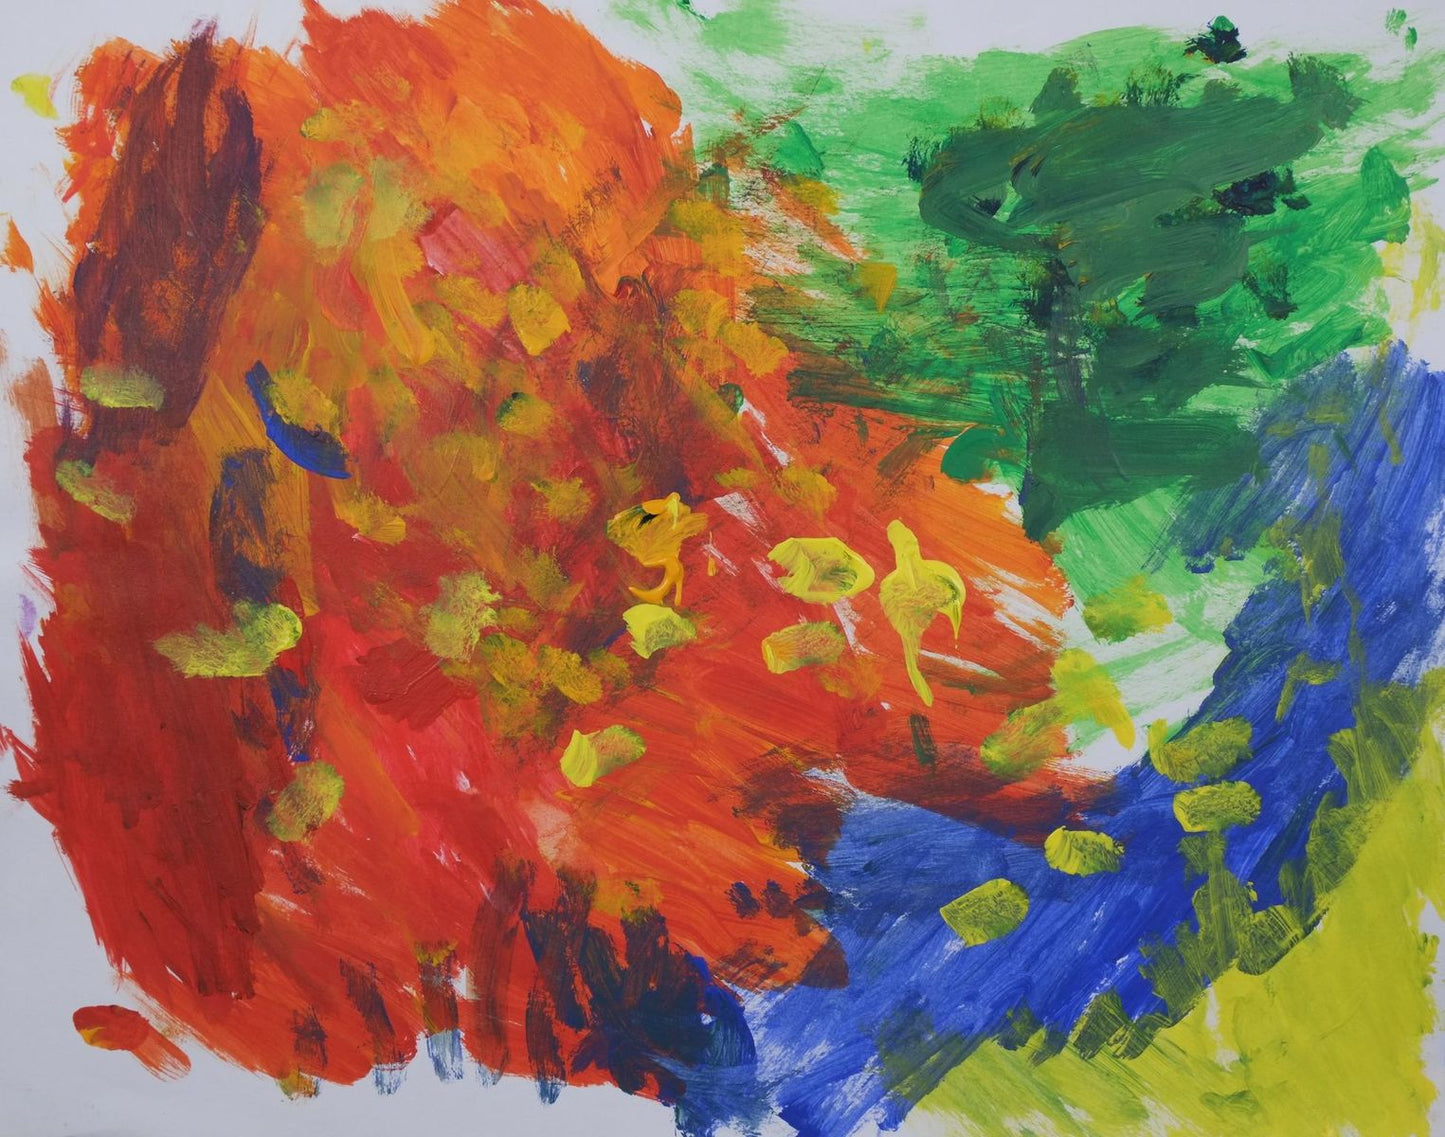 Acrylic on paper artwork on a white background with a red, orange, green, blue and yellow background with yellow paint splotches overlaid